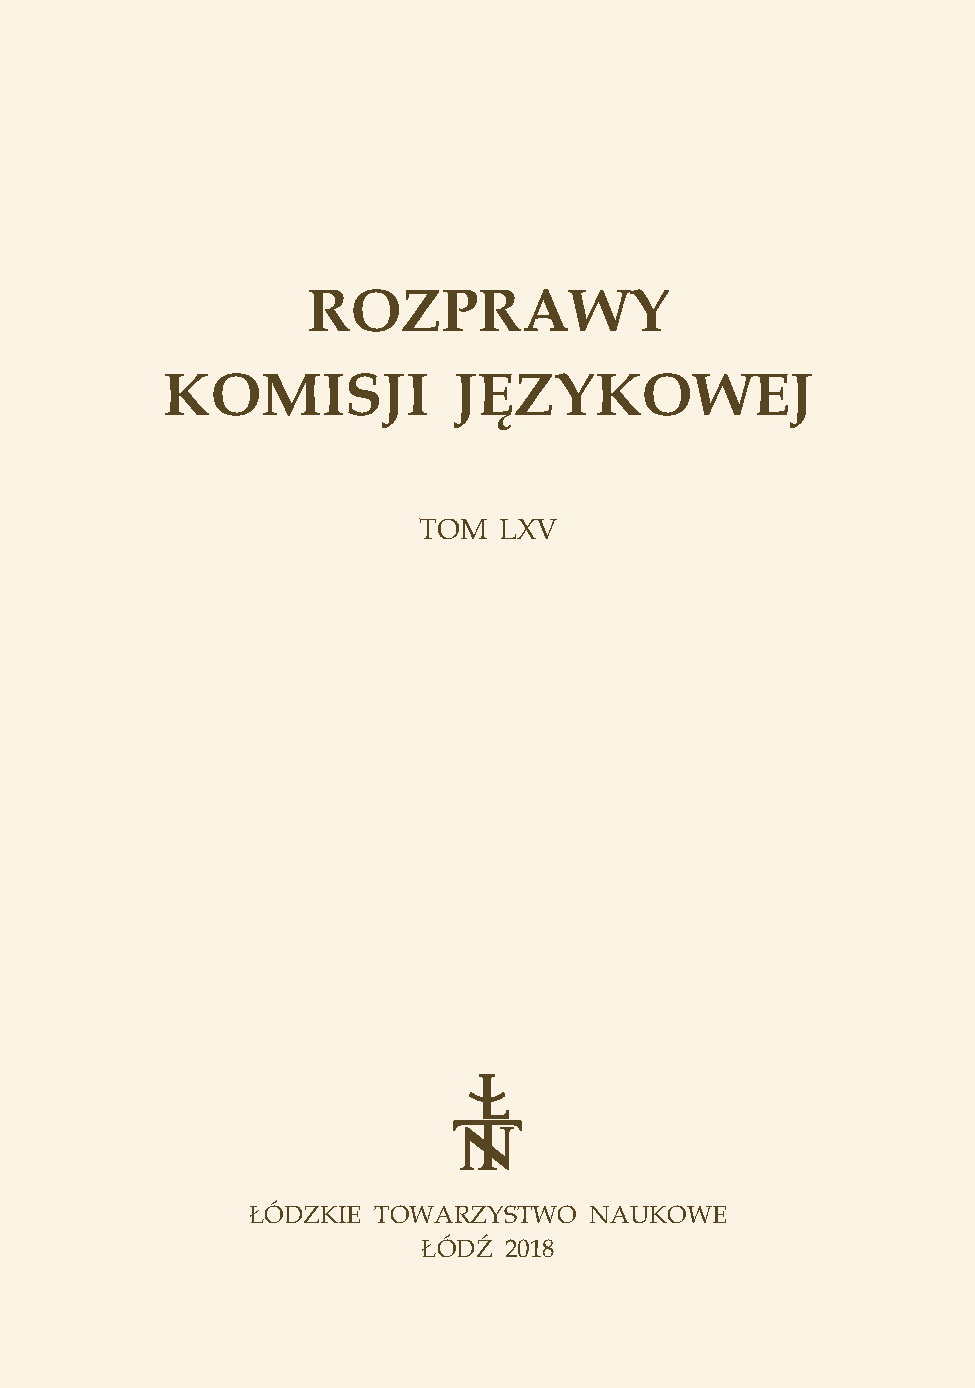 Towards the history of Eastern Slavonic biblical translations from Hebrew originals in the late 15th century Cover Image